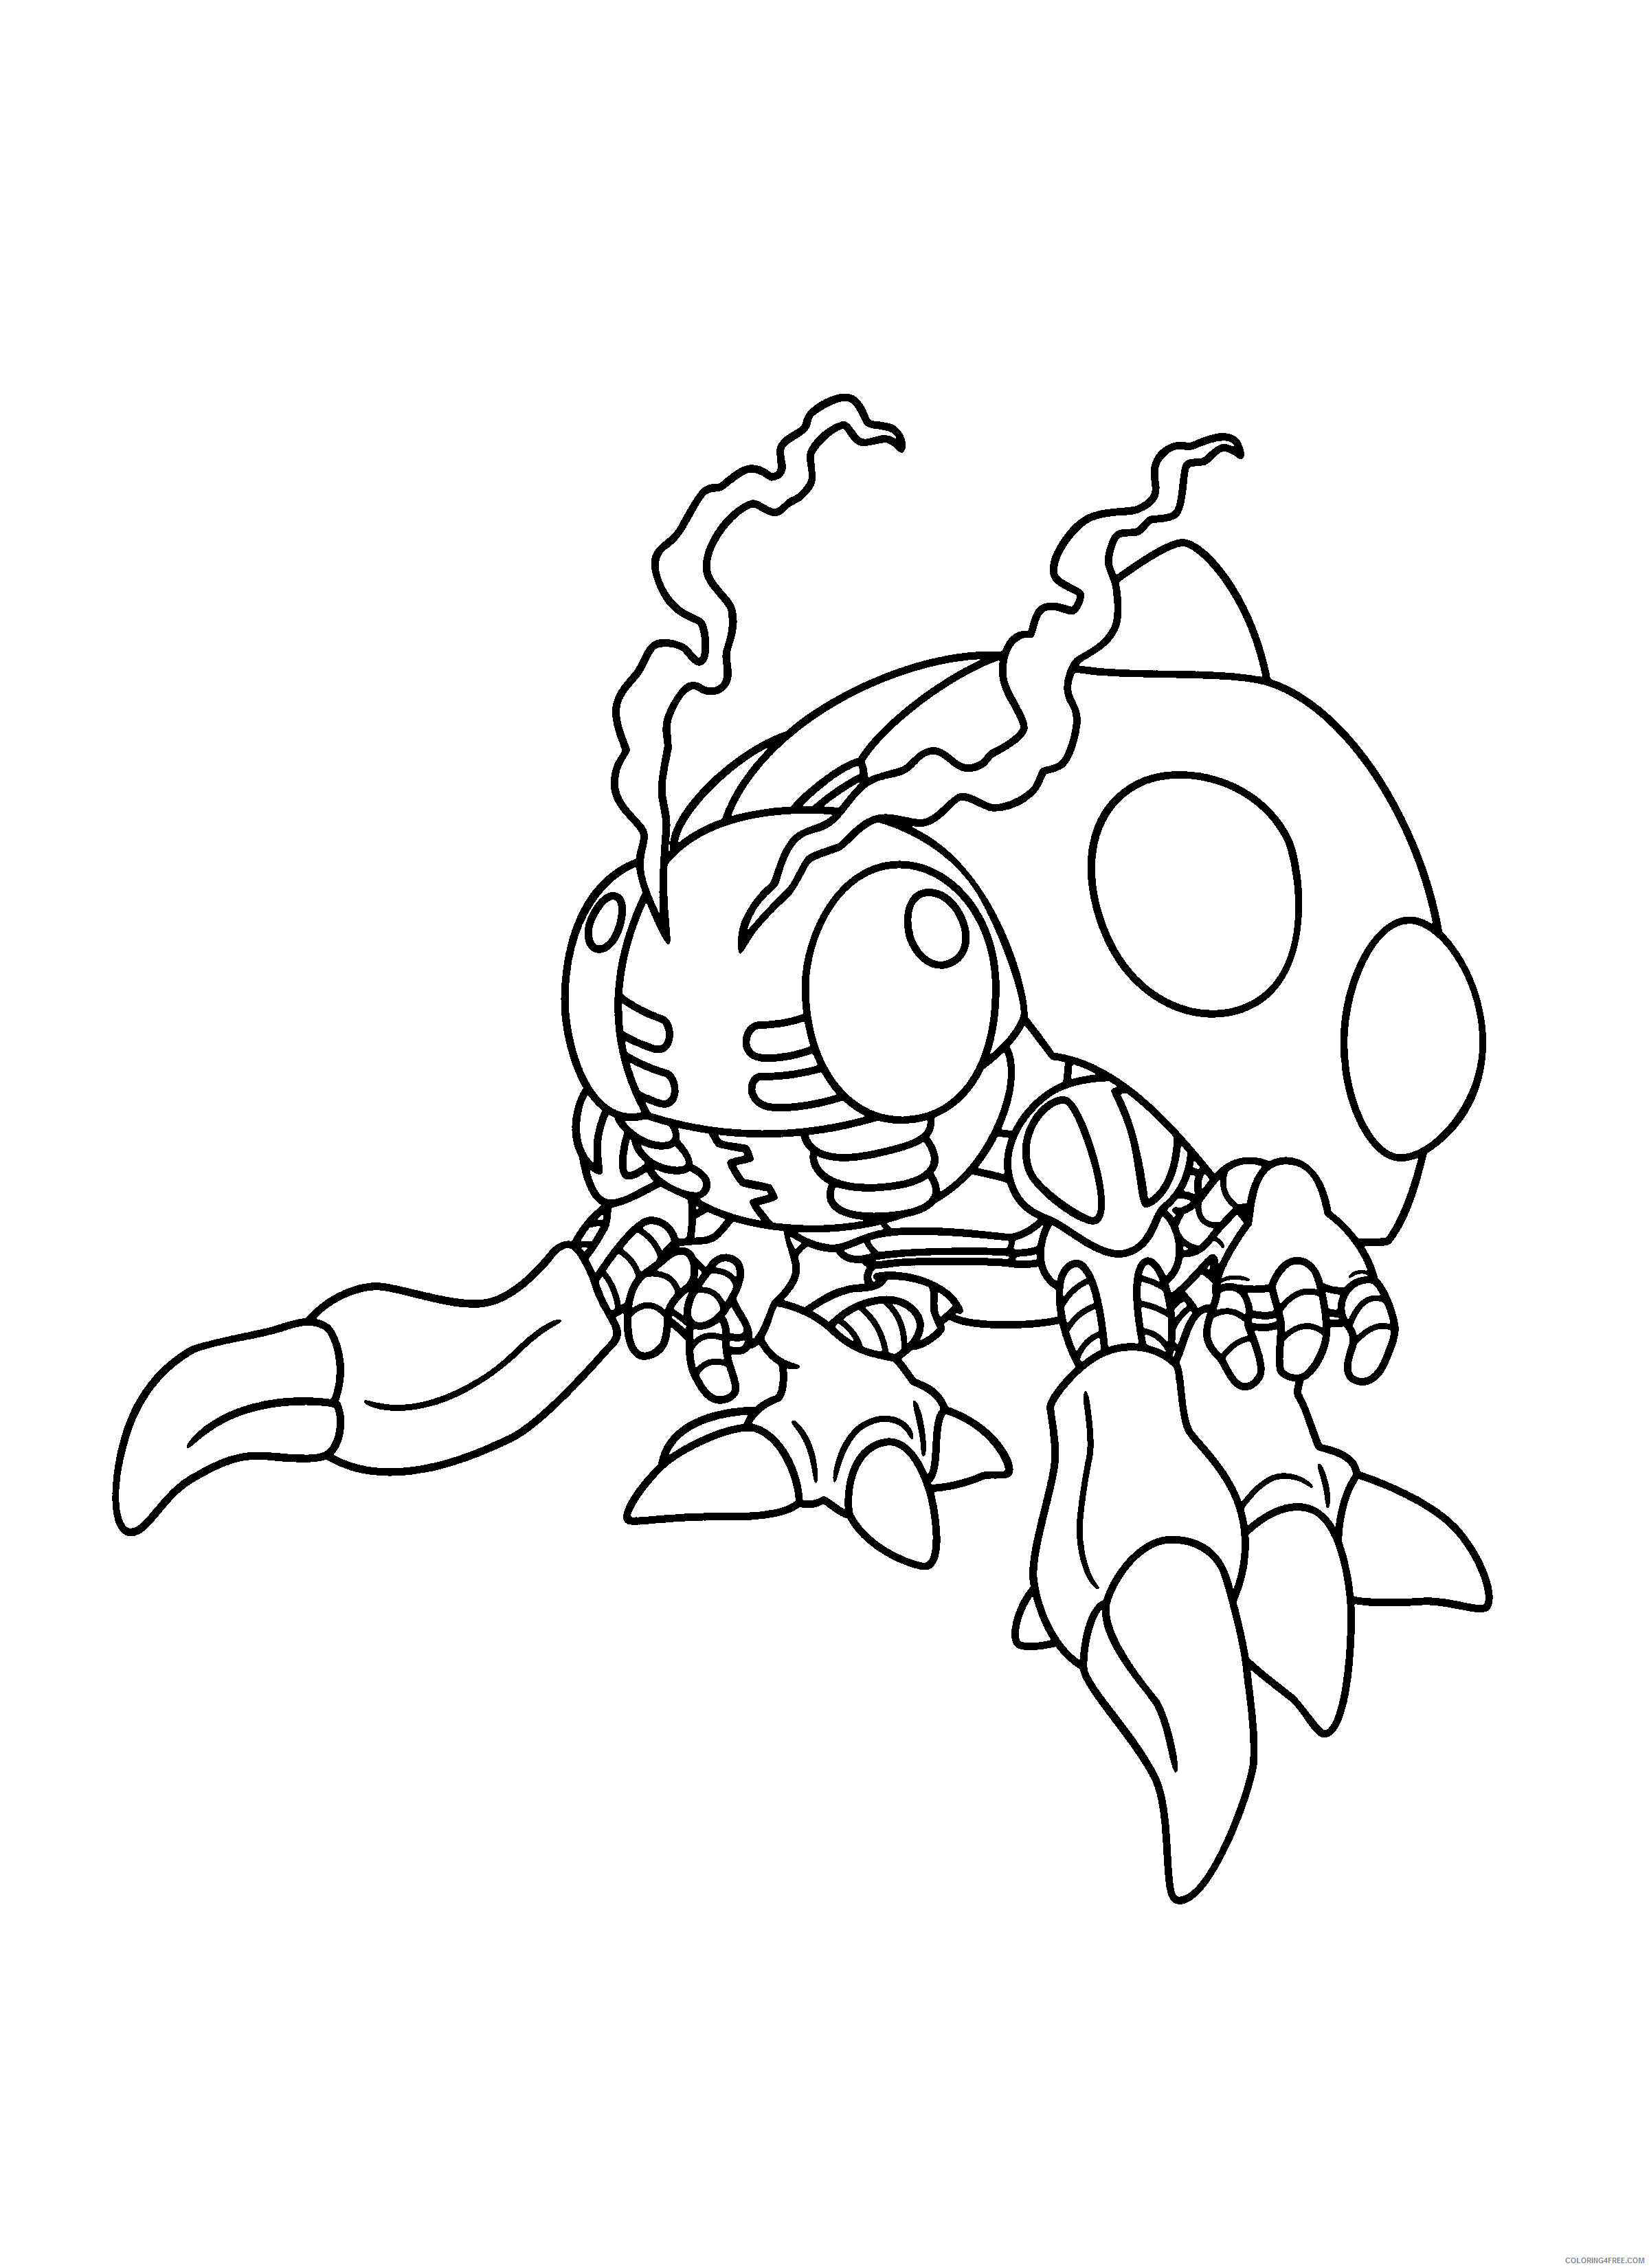 Digimon Printable Coloring Pages Anime digimon 257 2021 0337 Coloring4free